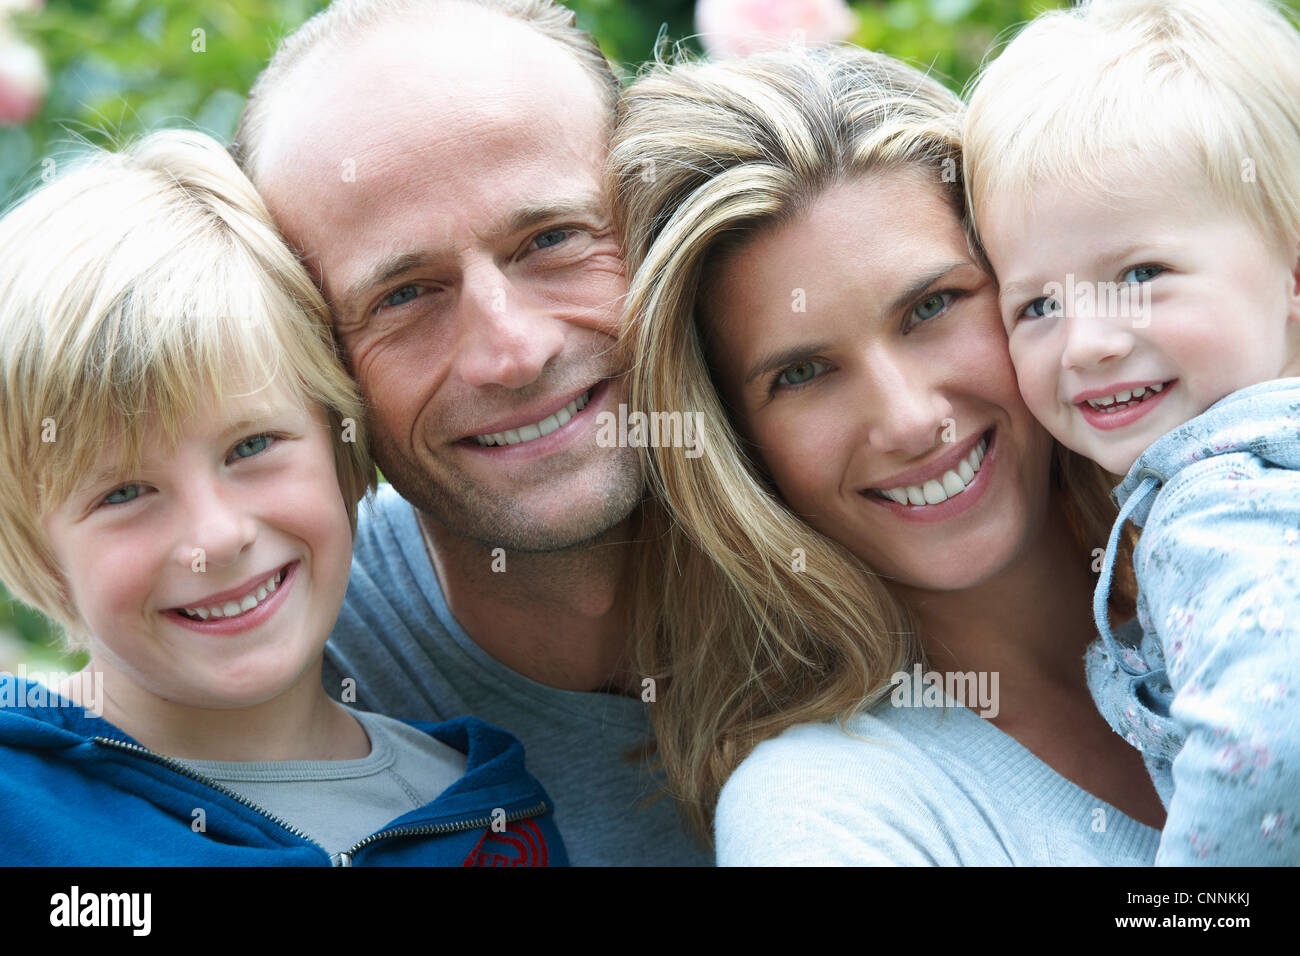 Close up of smiling family Banque D'Images